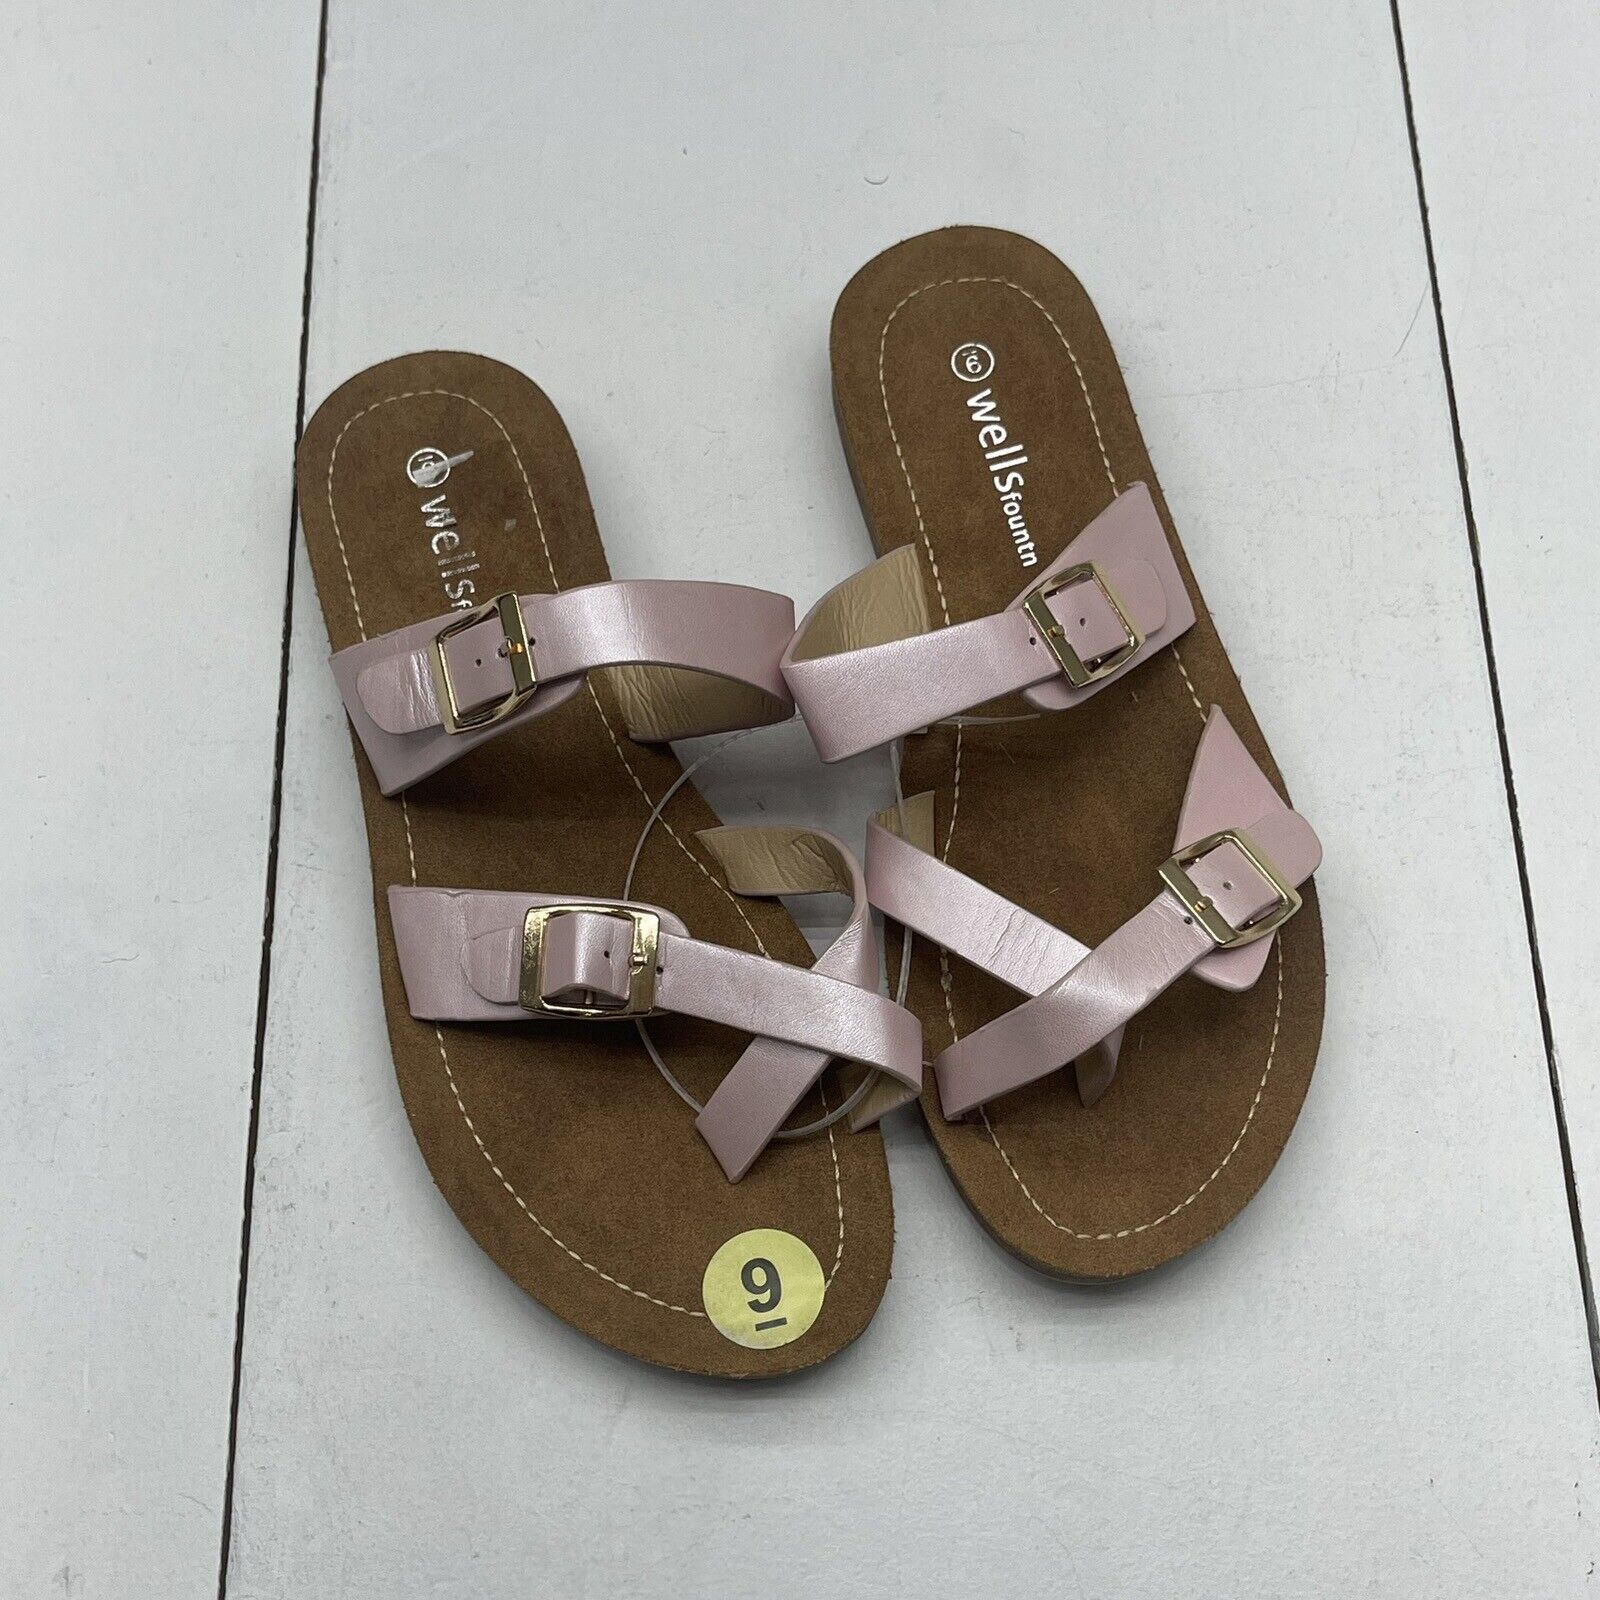 New and used Women's sandals for sale | Facebook Marketplace | Facebook